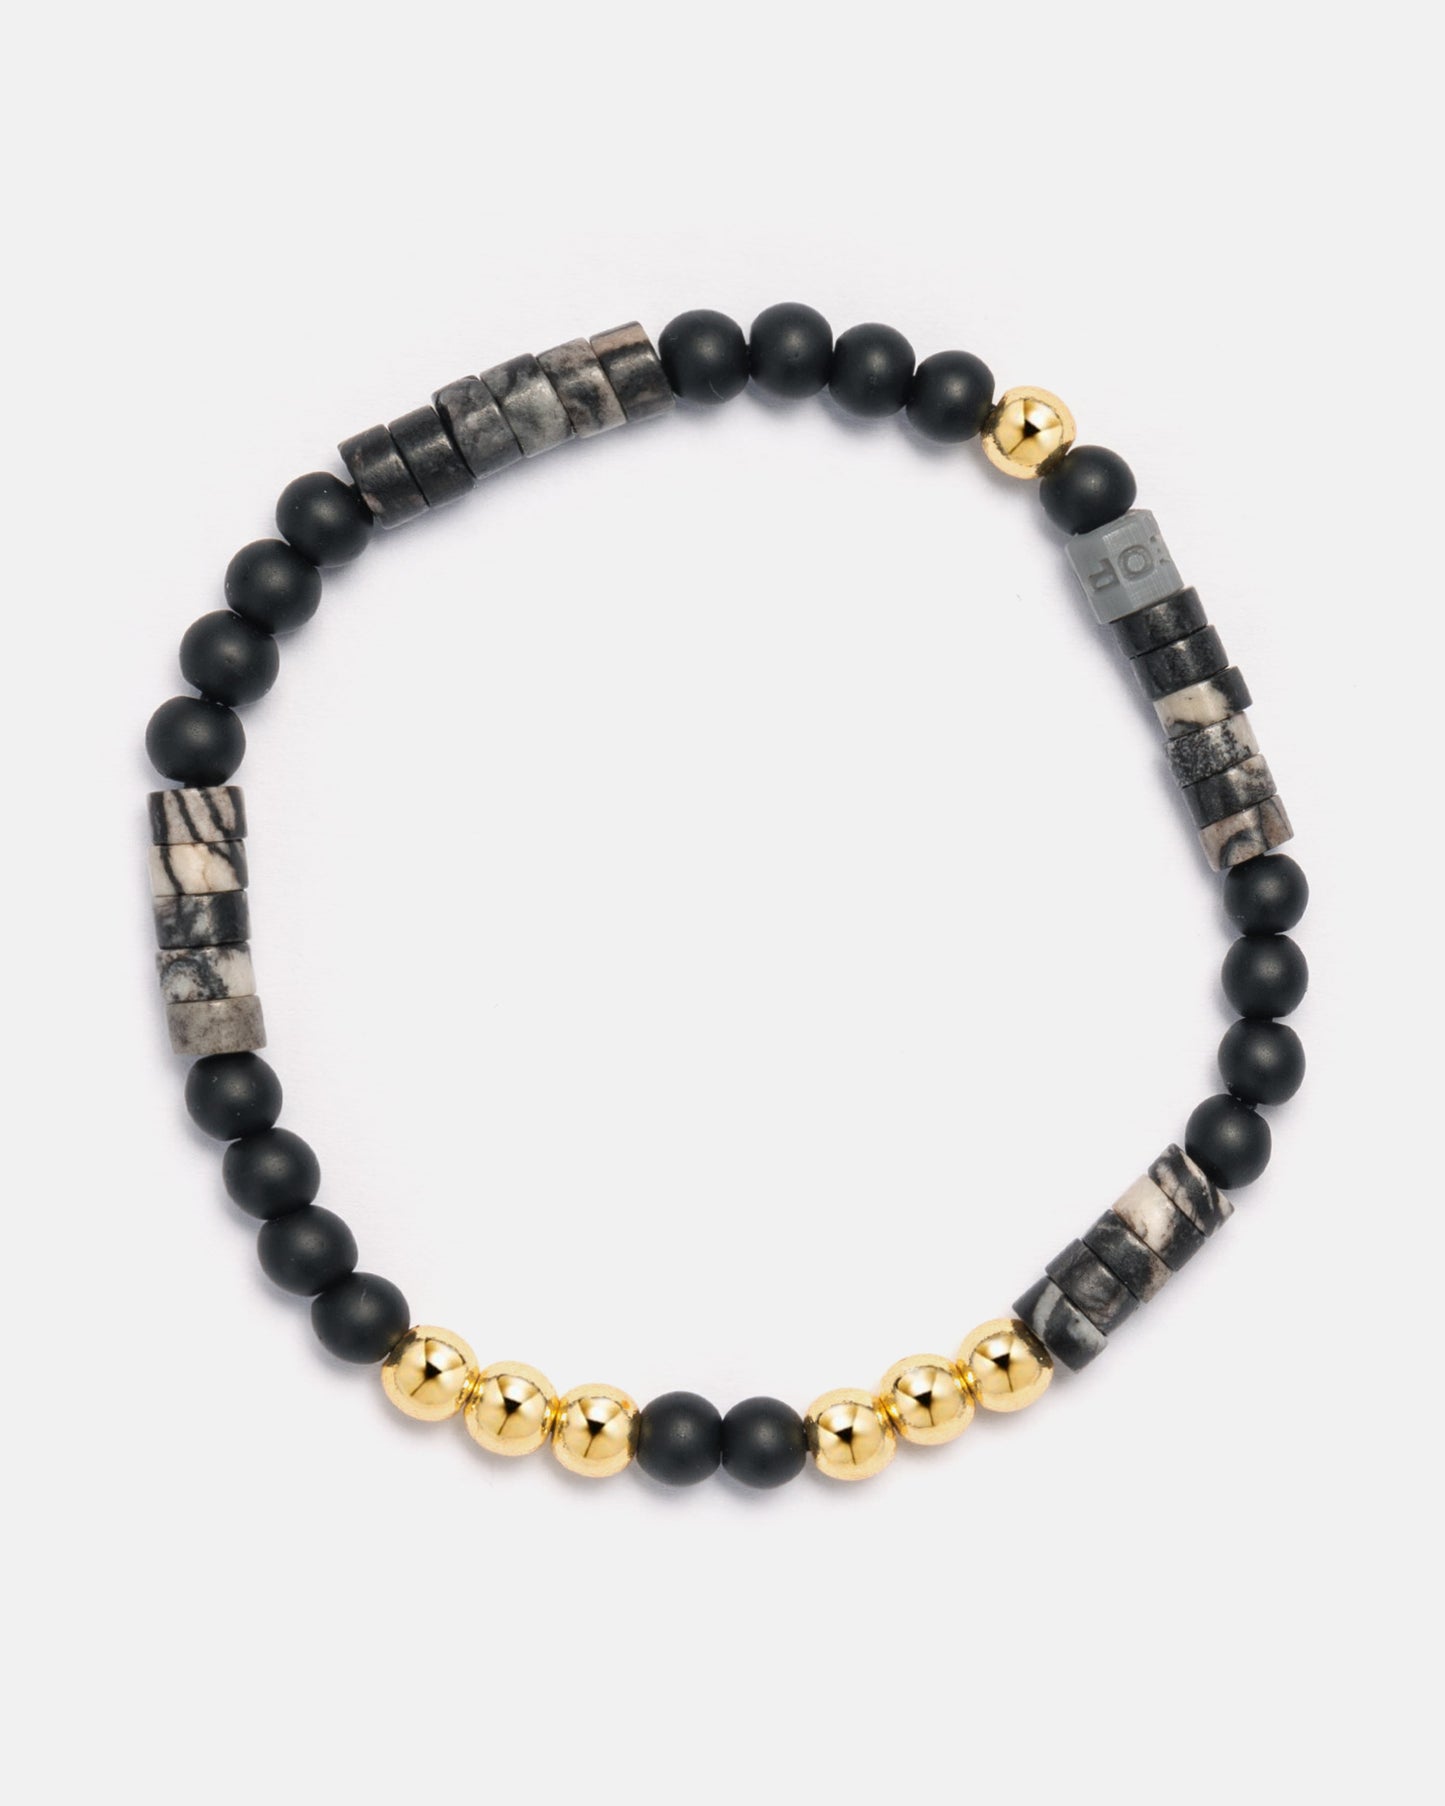 Beaded Bracelet with Black Seed Beads, Marble Discs and 18kt Gold Beads